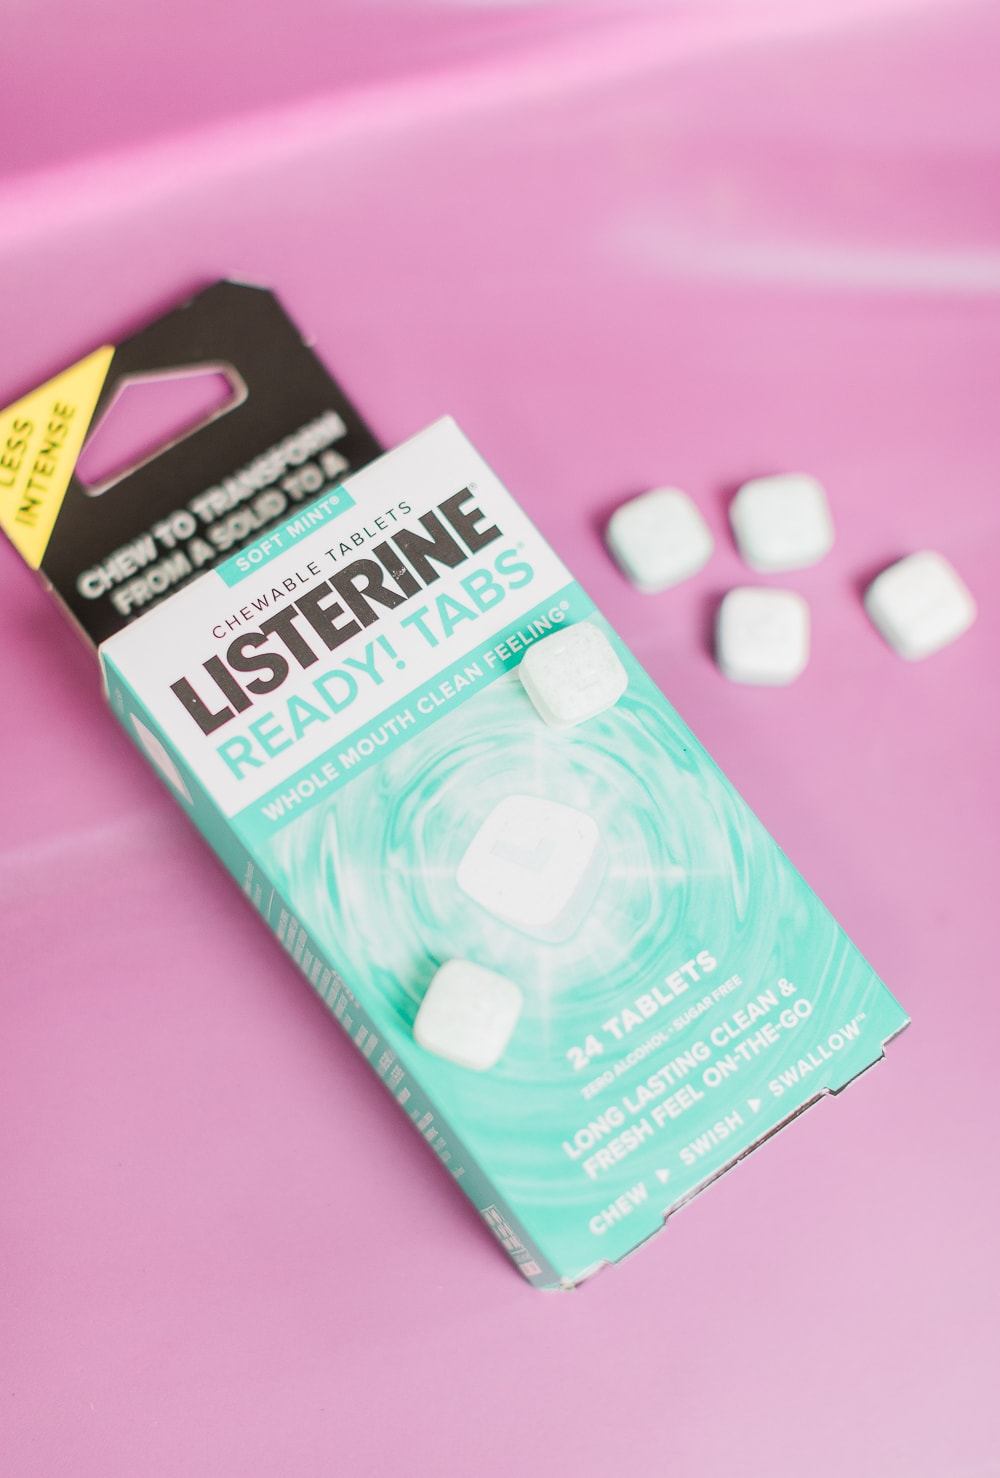 Listerine Ready Tabs in Soft Mint Review by blogger Stephanie Ziajka on Diary of a Debutante